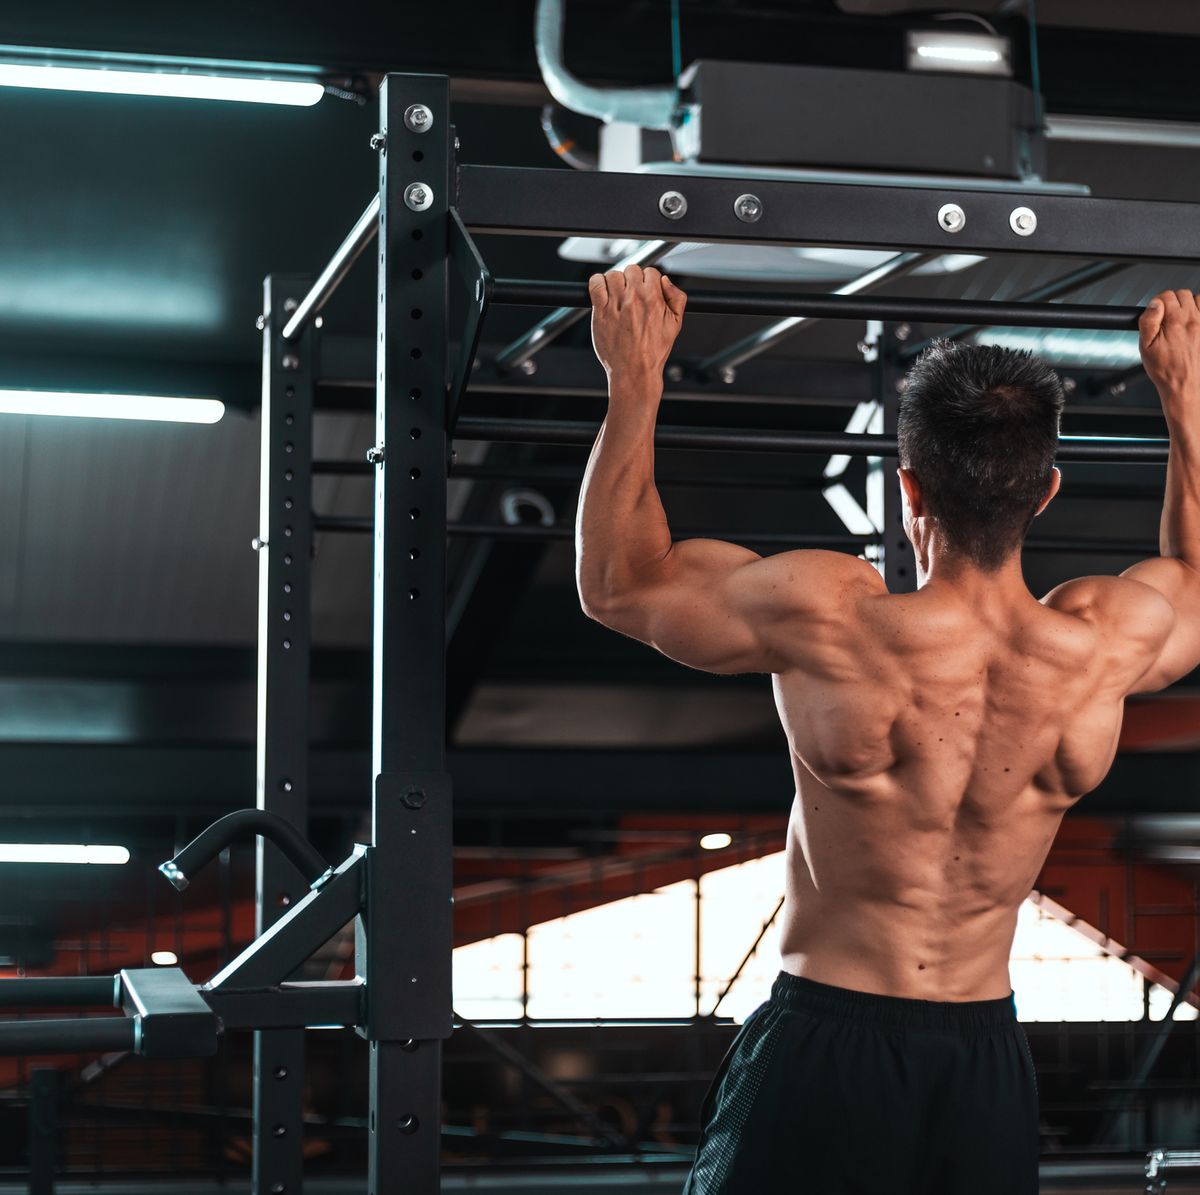 Build a Strong Back With Pull-Ups - stack